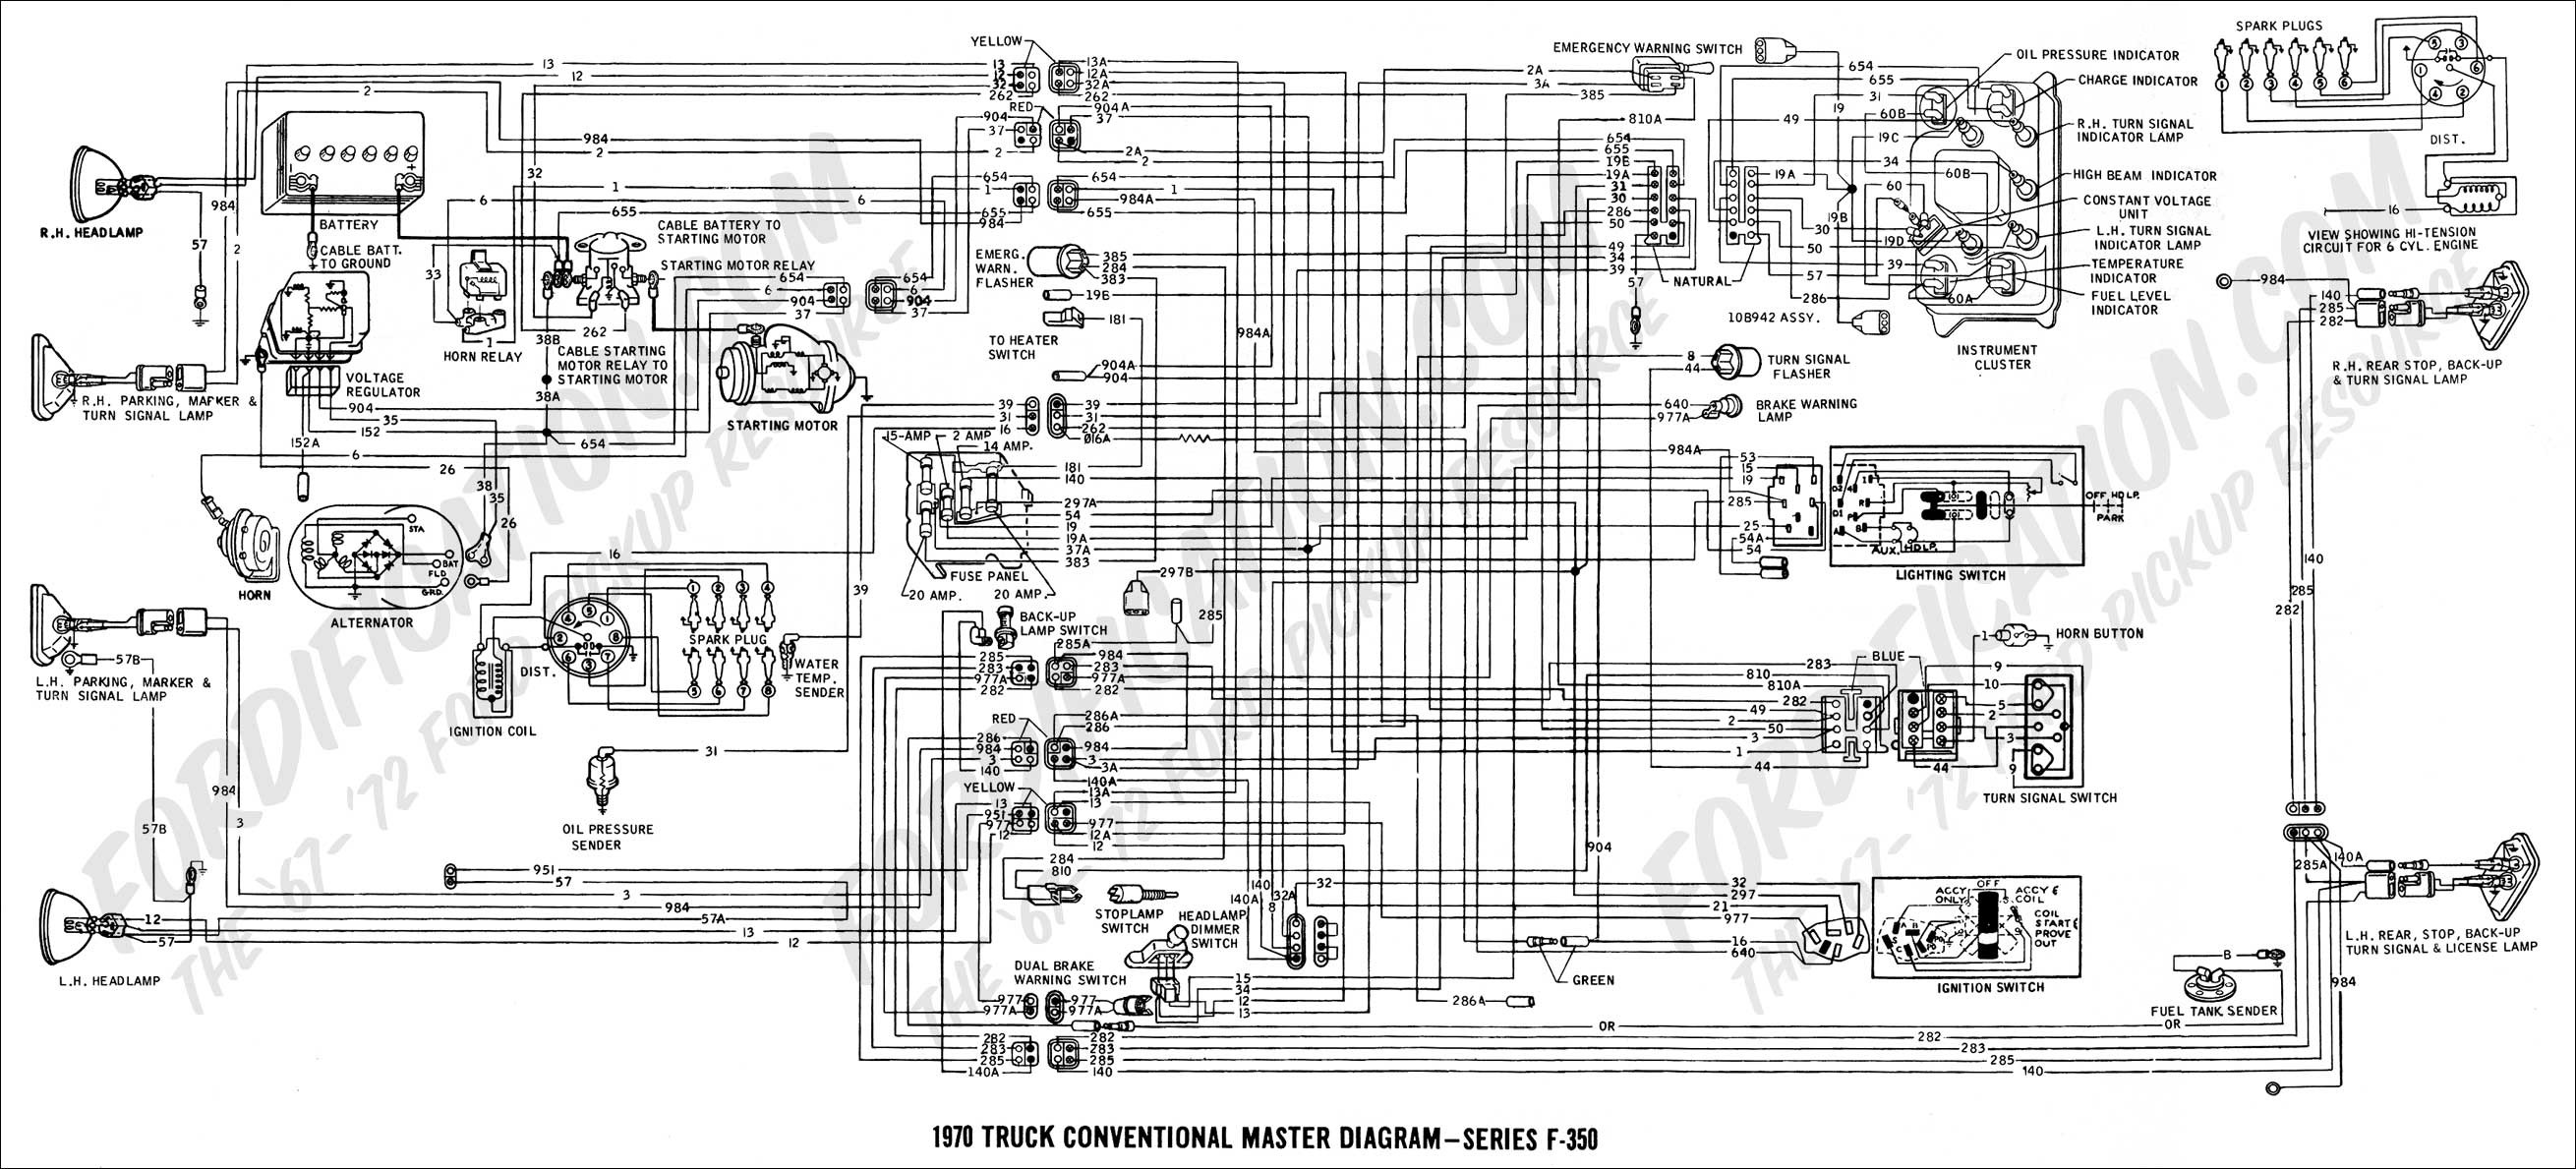 2002 ford Mustang Engine Diagram Diagram as Well ford F 350 Wiring Diagram In Addition ford Headlight